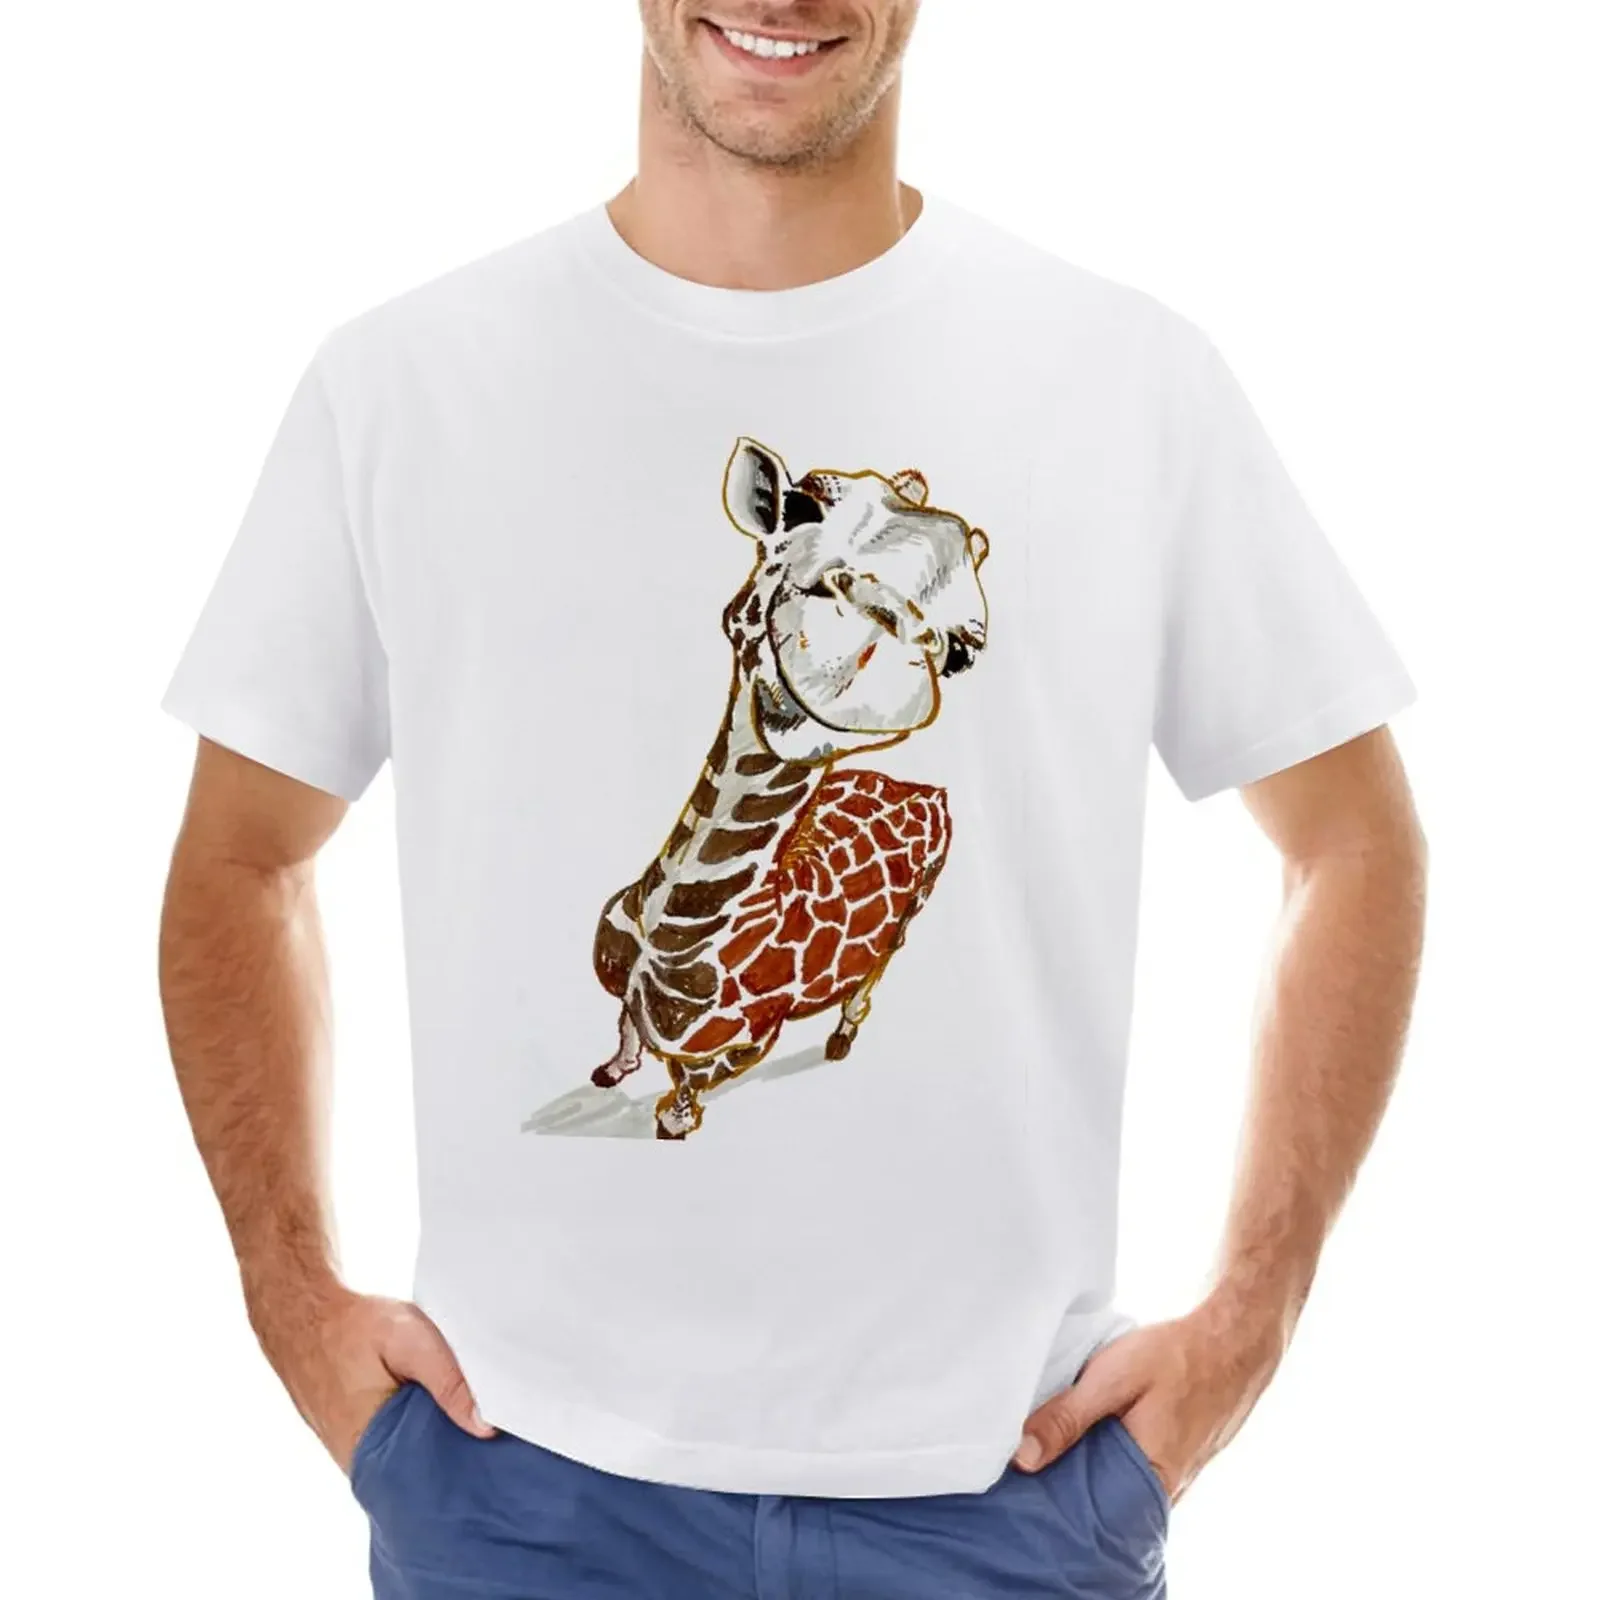 

Baby Giraffe T-Shirt vintage customs design your own graphics quick-drying black t-shirts for men